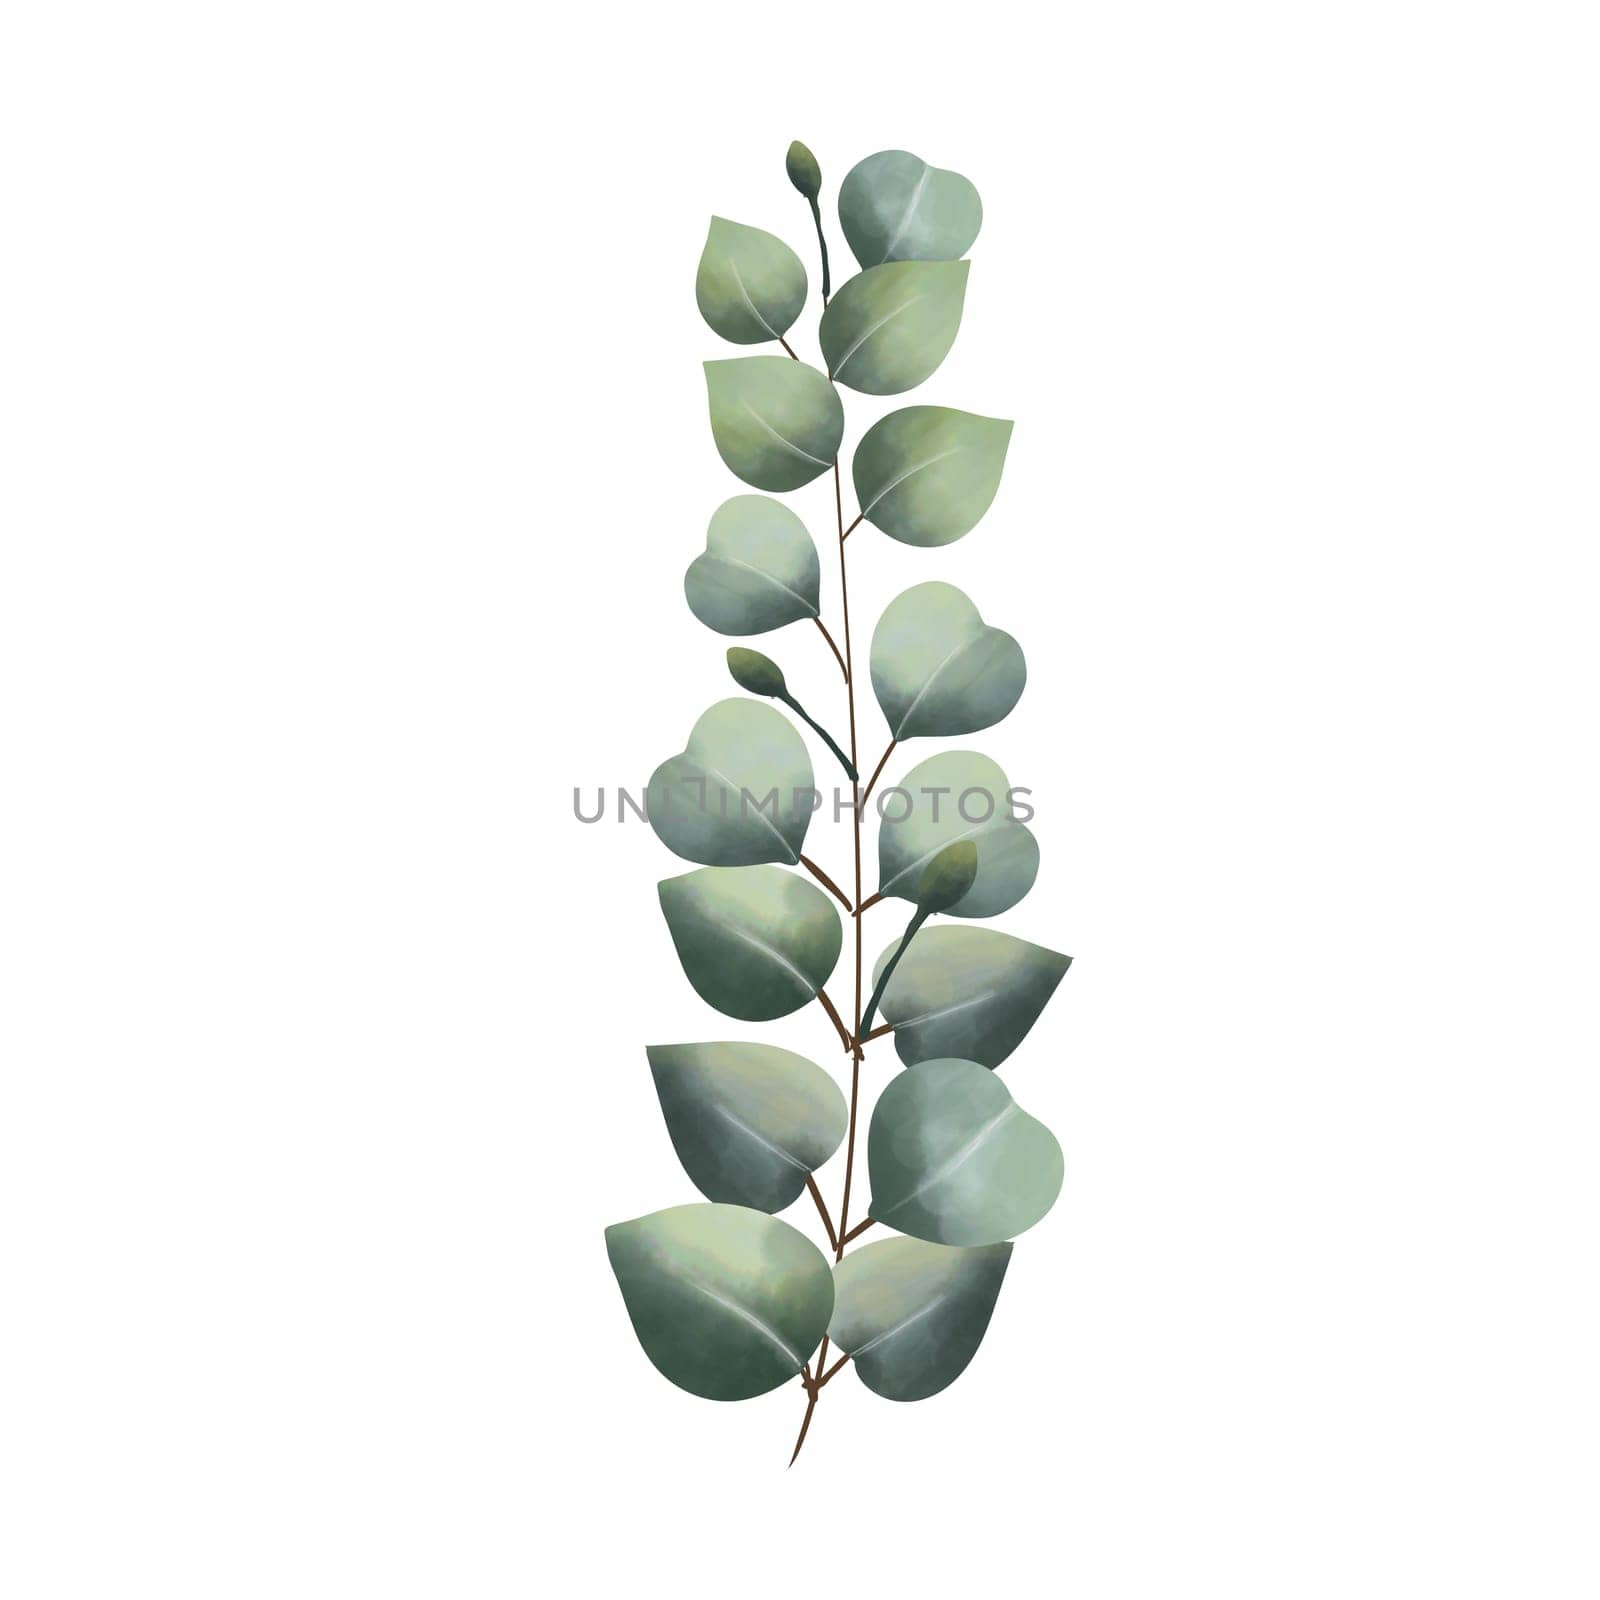 watercolor eucalyptus vines on a white background
Isolated